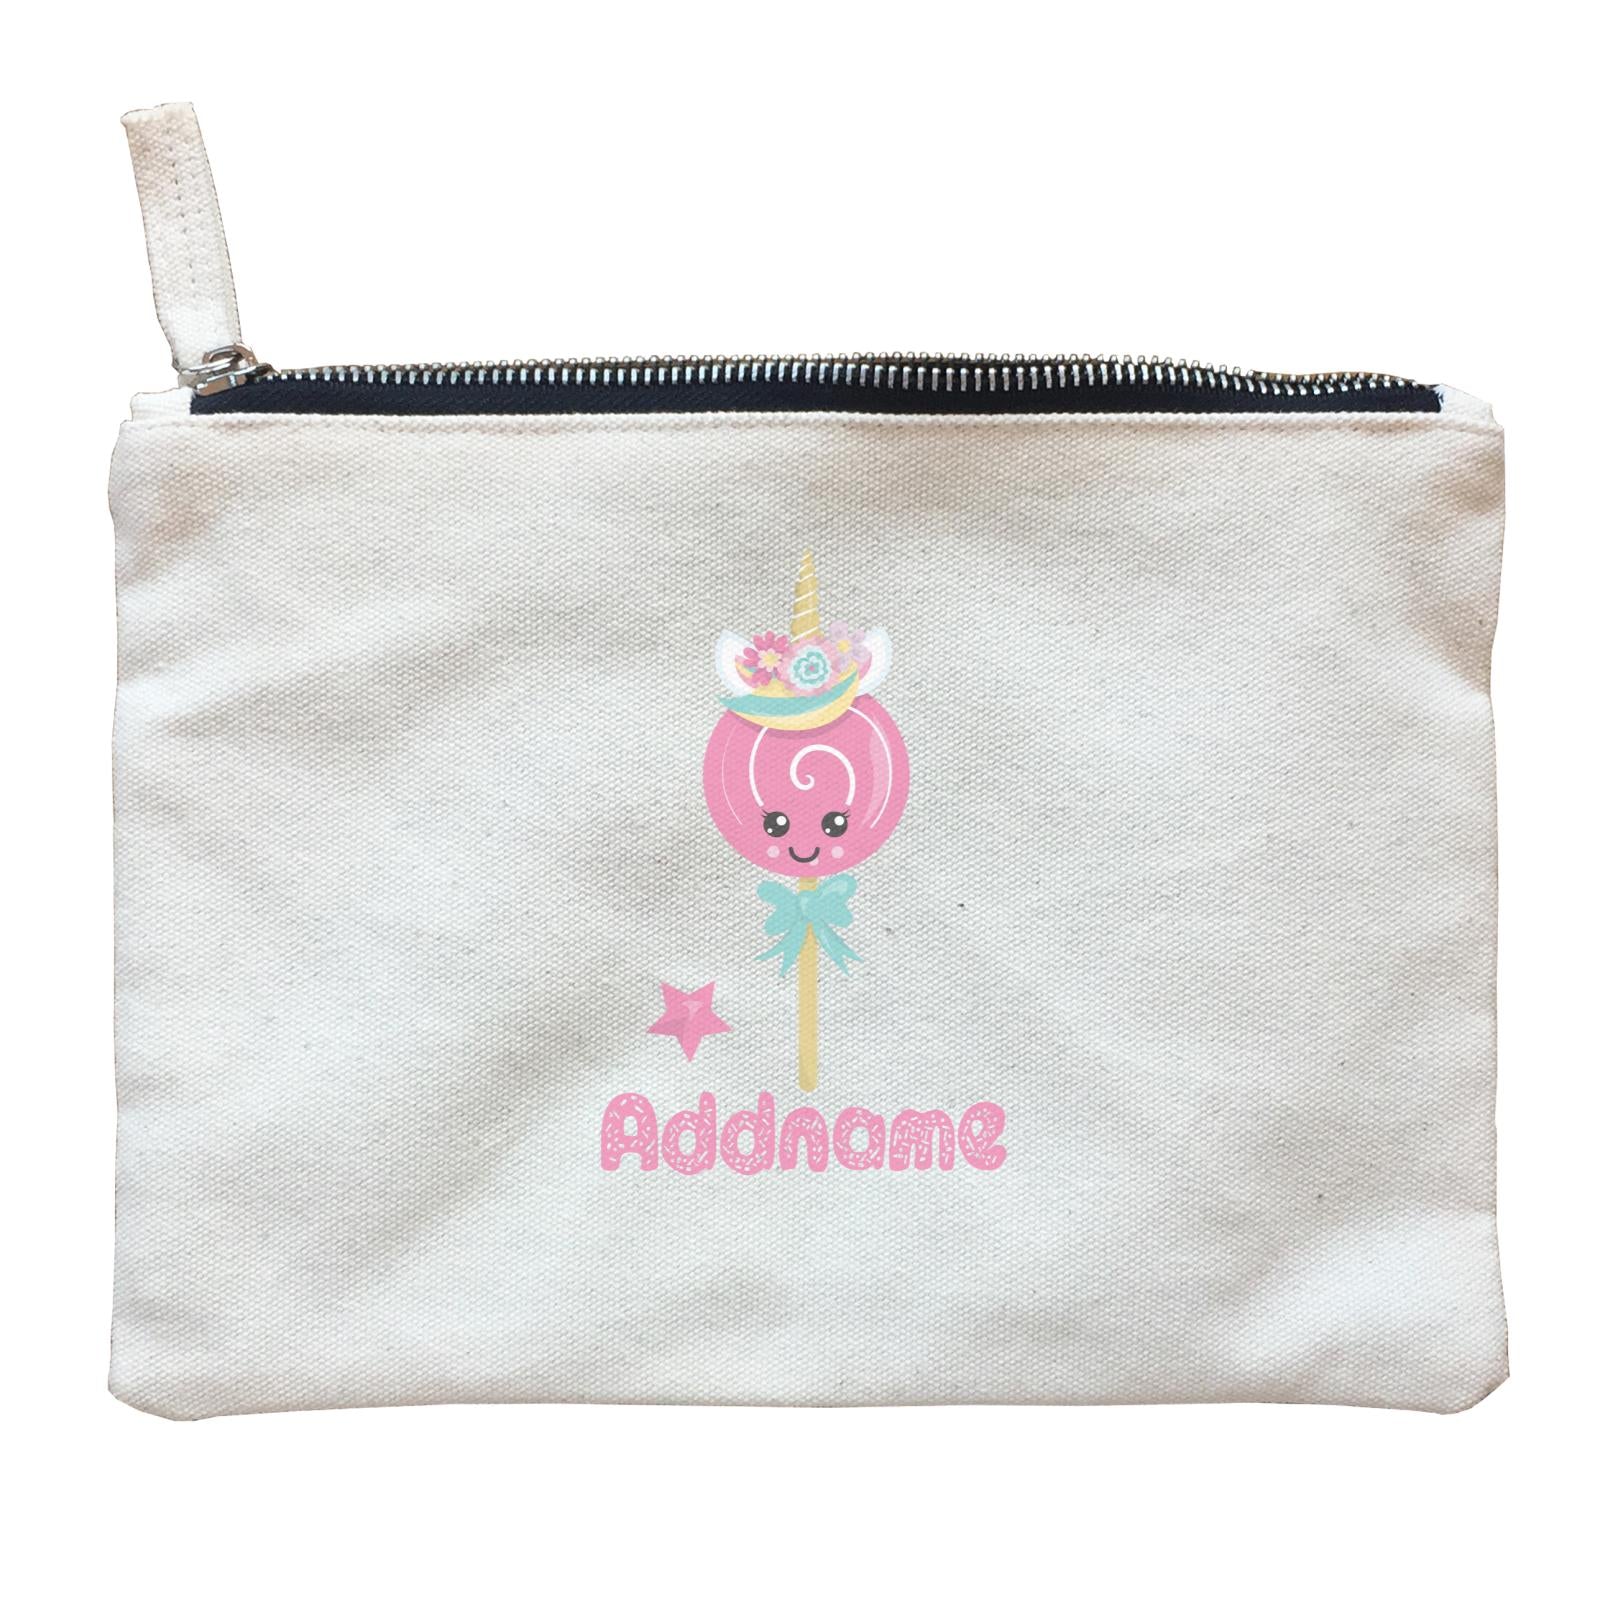 Magical Sweets Pink Lollipop Addname Zipper Pouch